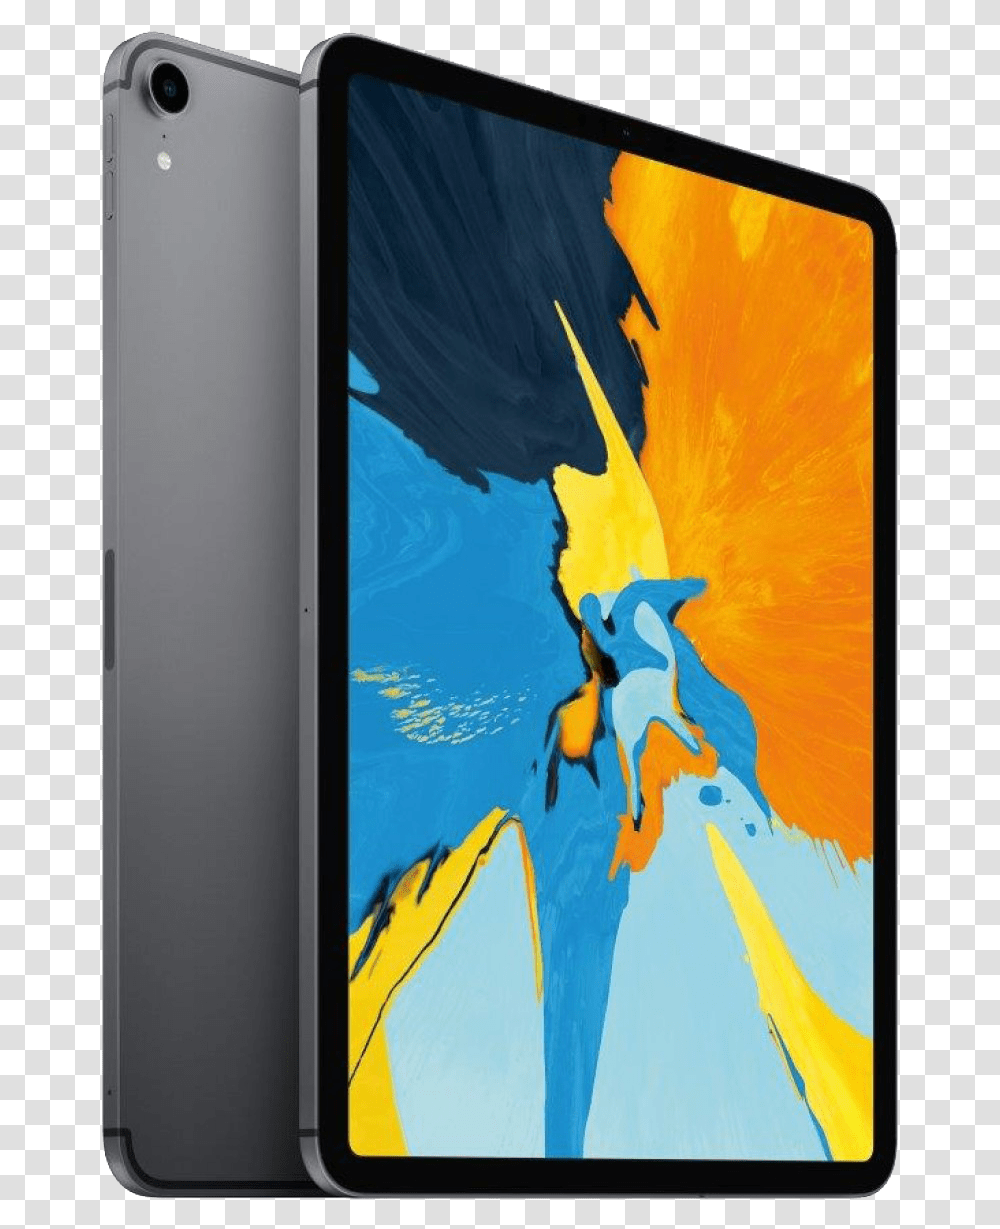 Ipad Free Ipad Pro 11 2018, Mobile Phone, Electronics, Cell Phone Transparent Png